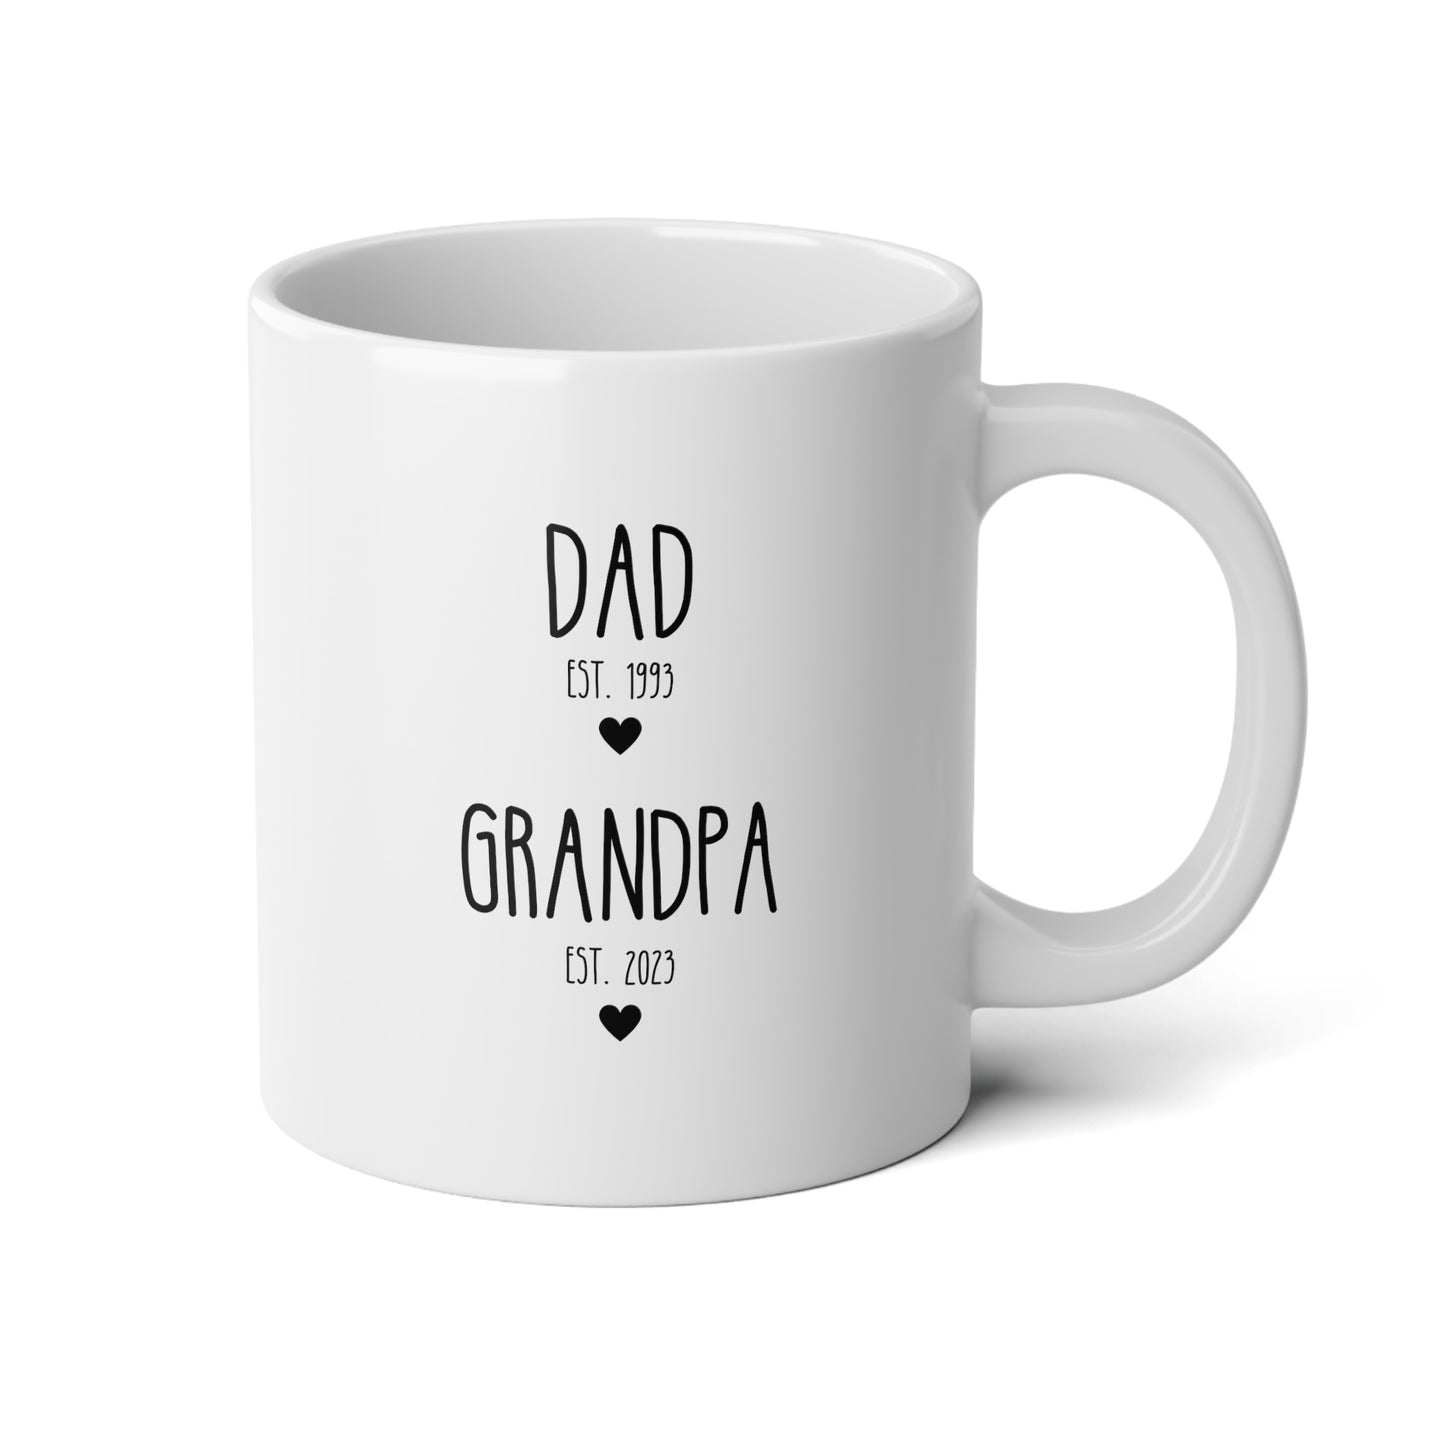 Dad Est Grandpa Est 20oz white funny large coffee mug gift for new grandpa first time grandfather pregnancy announcement custom date customize personalize waveywares wavey wares wavywares wavy wares